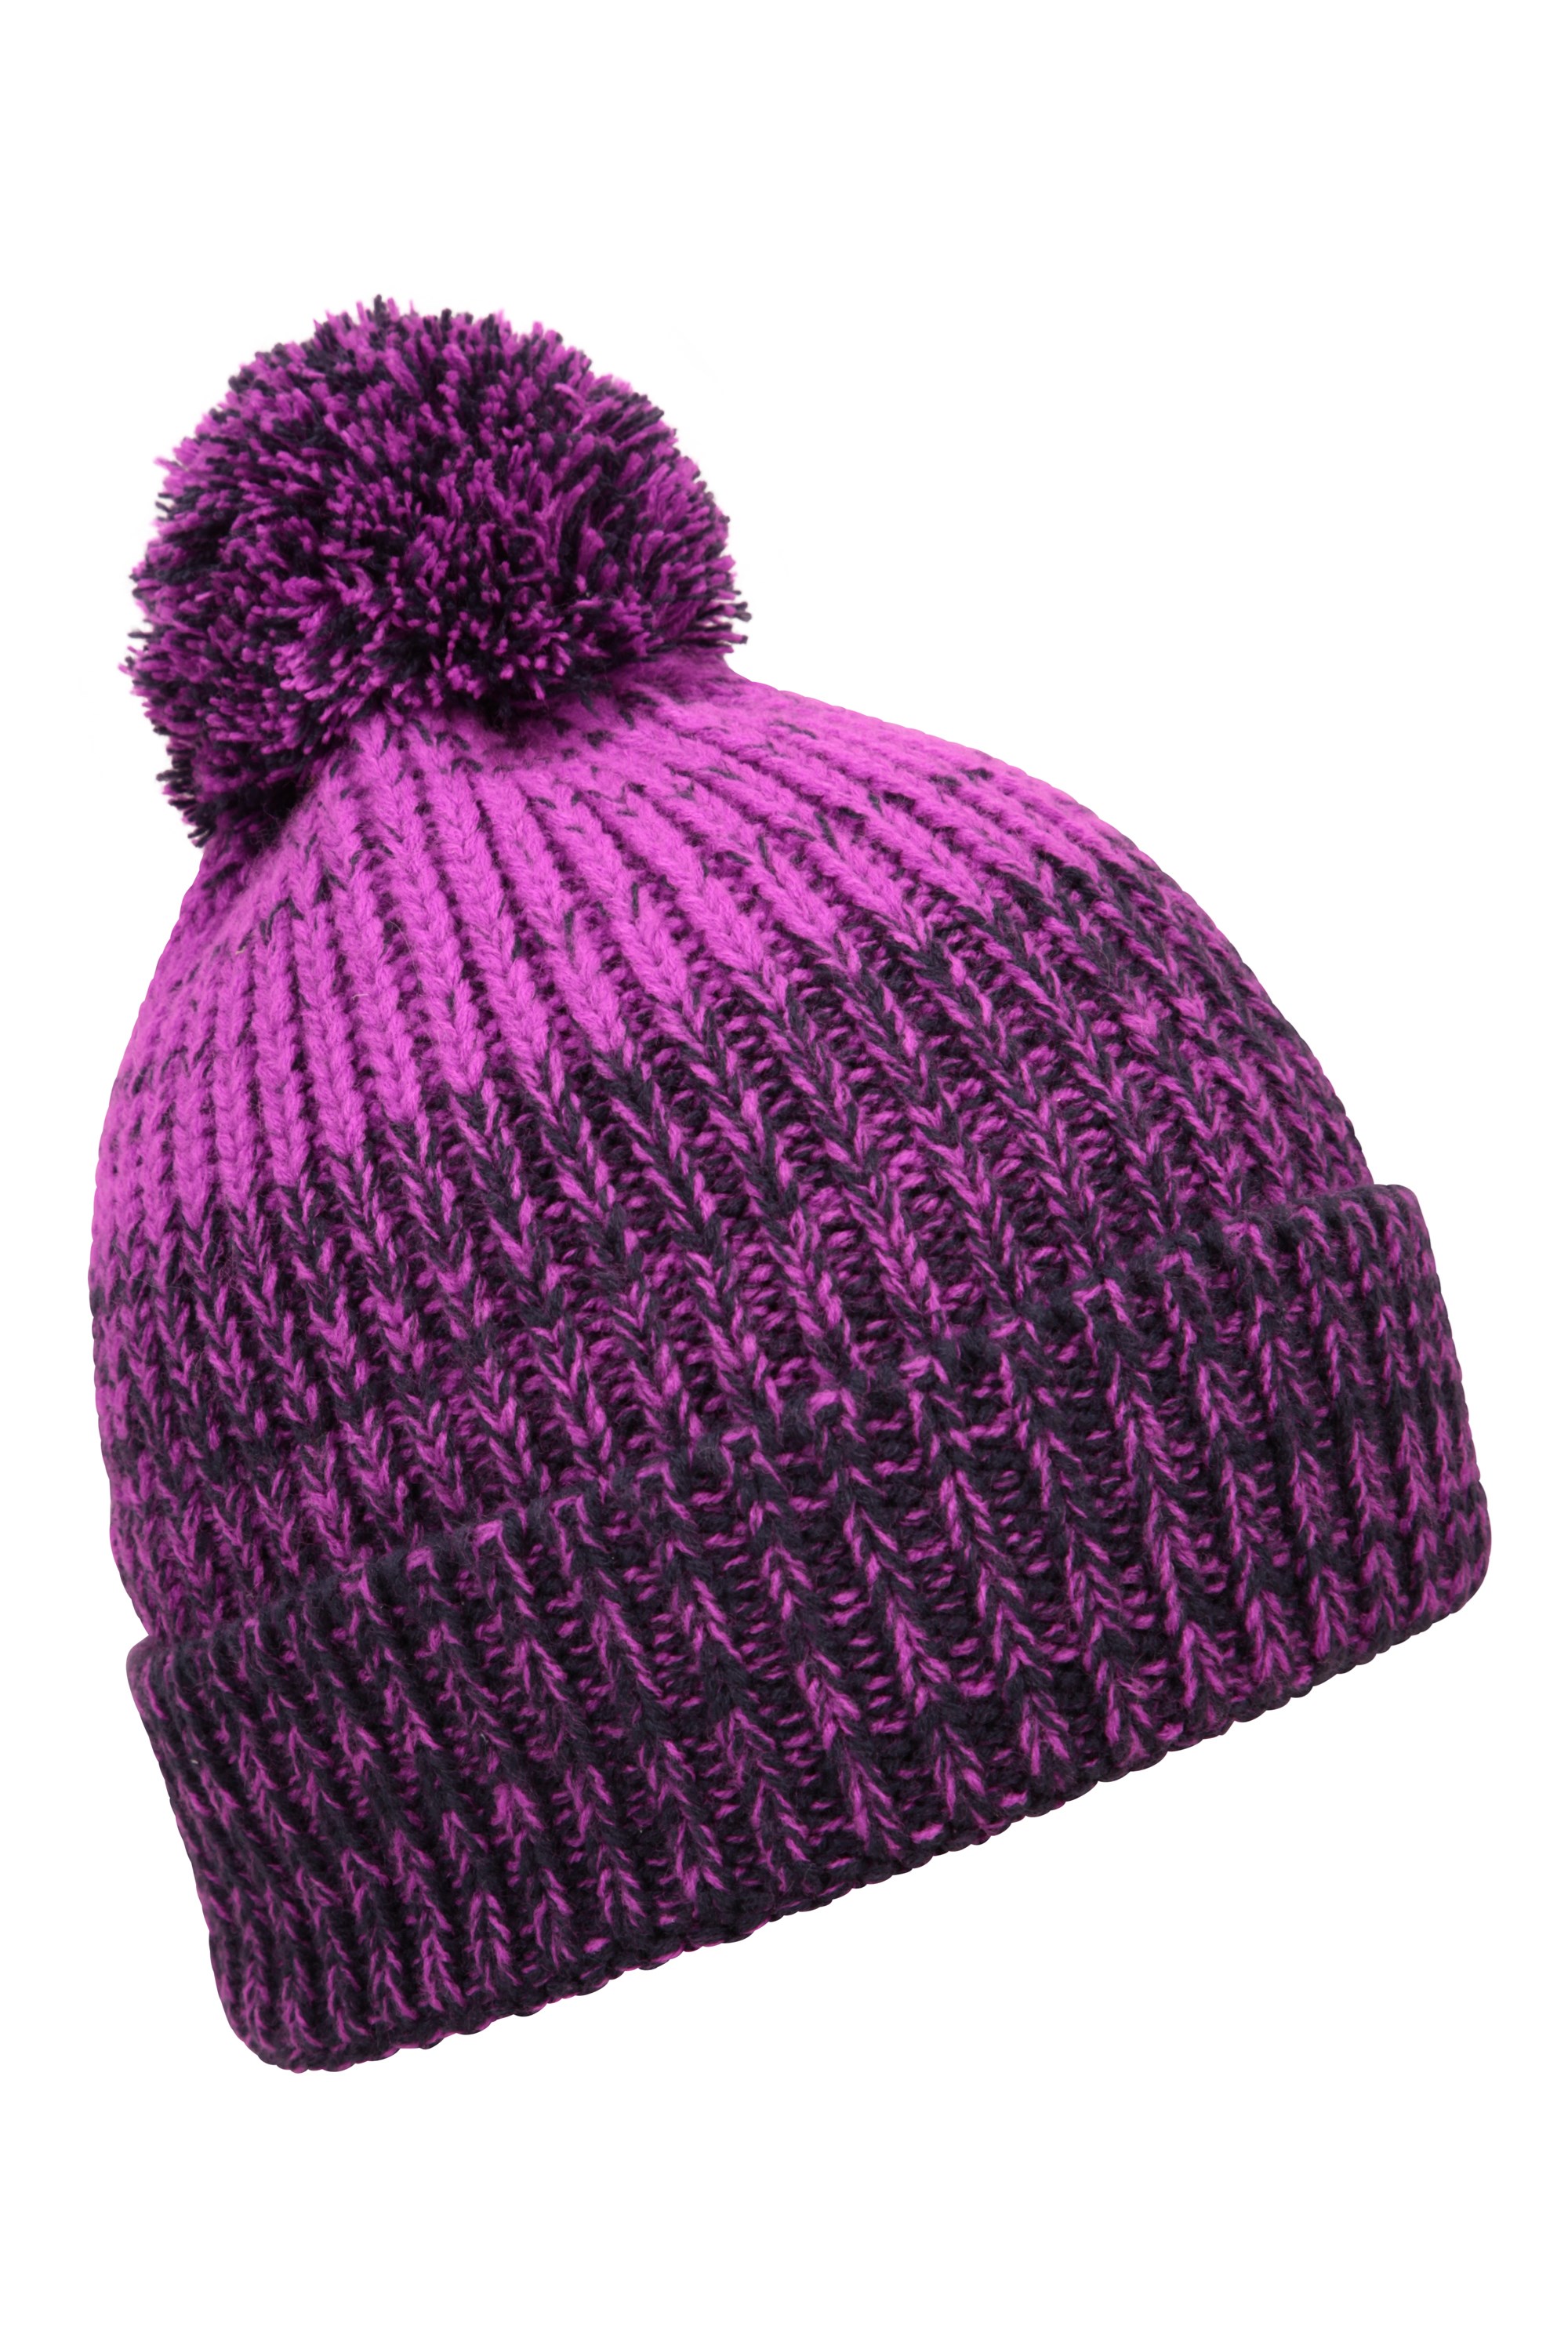 KNITTED THINSULATE STYLE THERMAL SKI BOBBLE POM BEANIE WOOLLY HAT UK SELLER 